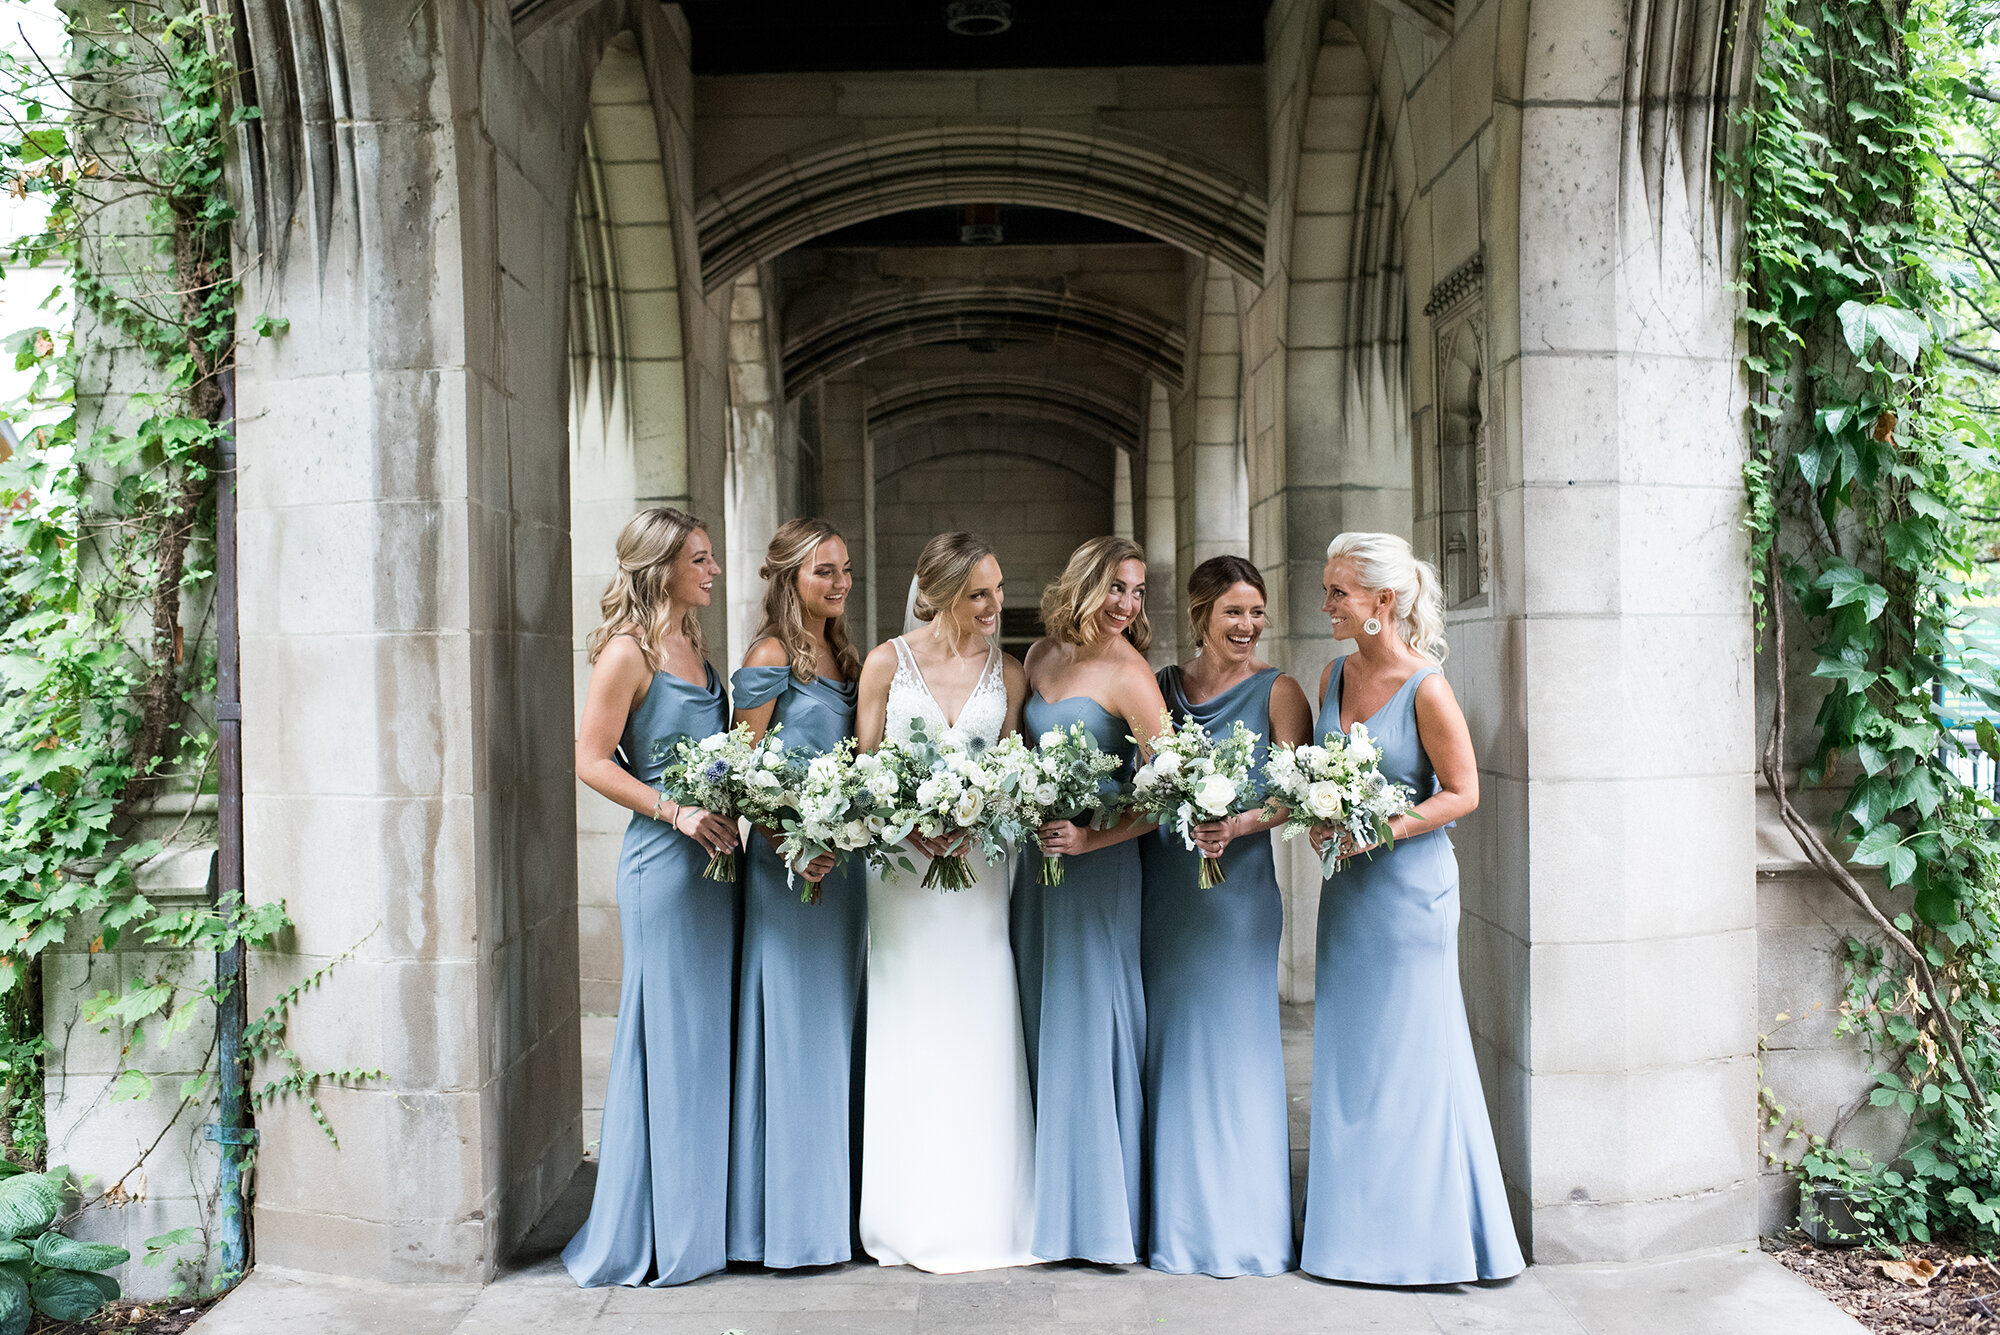 Chicago History Museum Summer Wedding captured by Layla Eloa featured on CHI thee WED